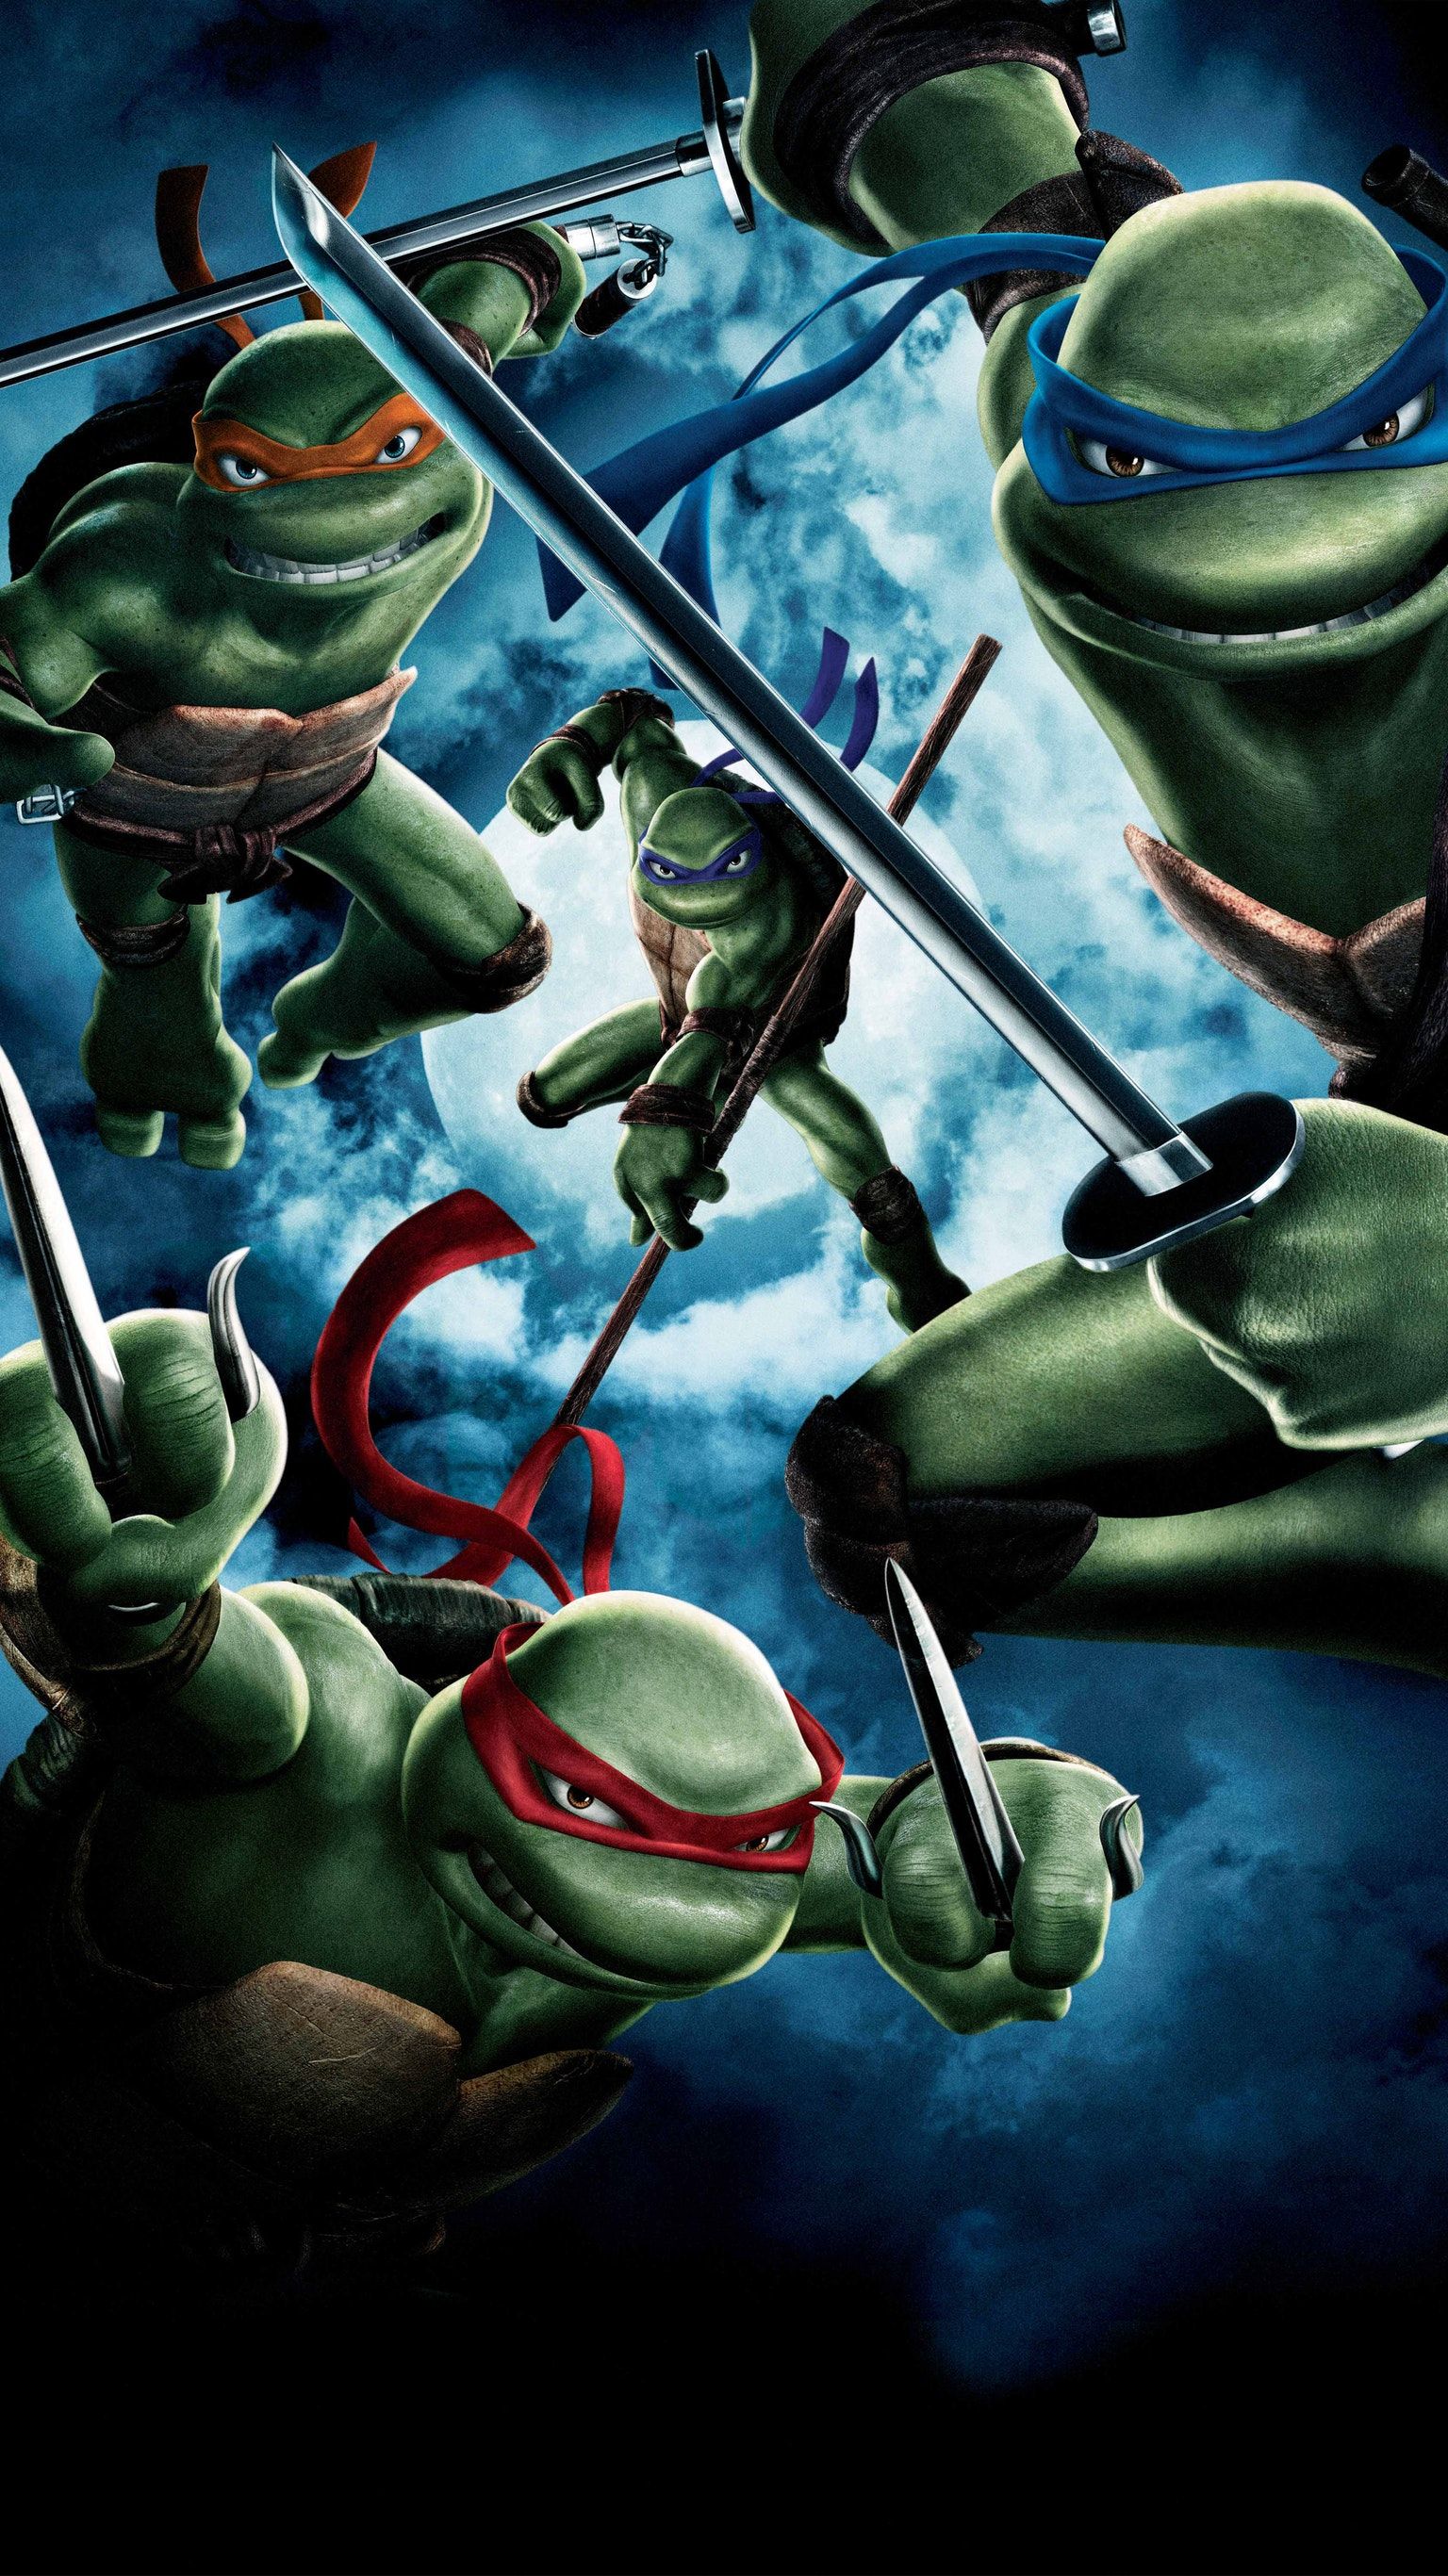 Turtles Tmnt Background Image And Wallpaper Yl Puting